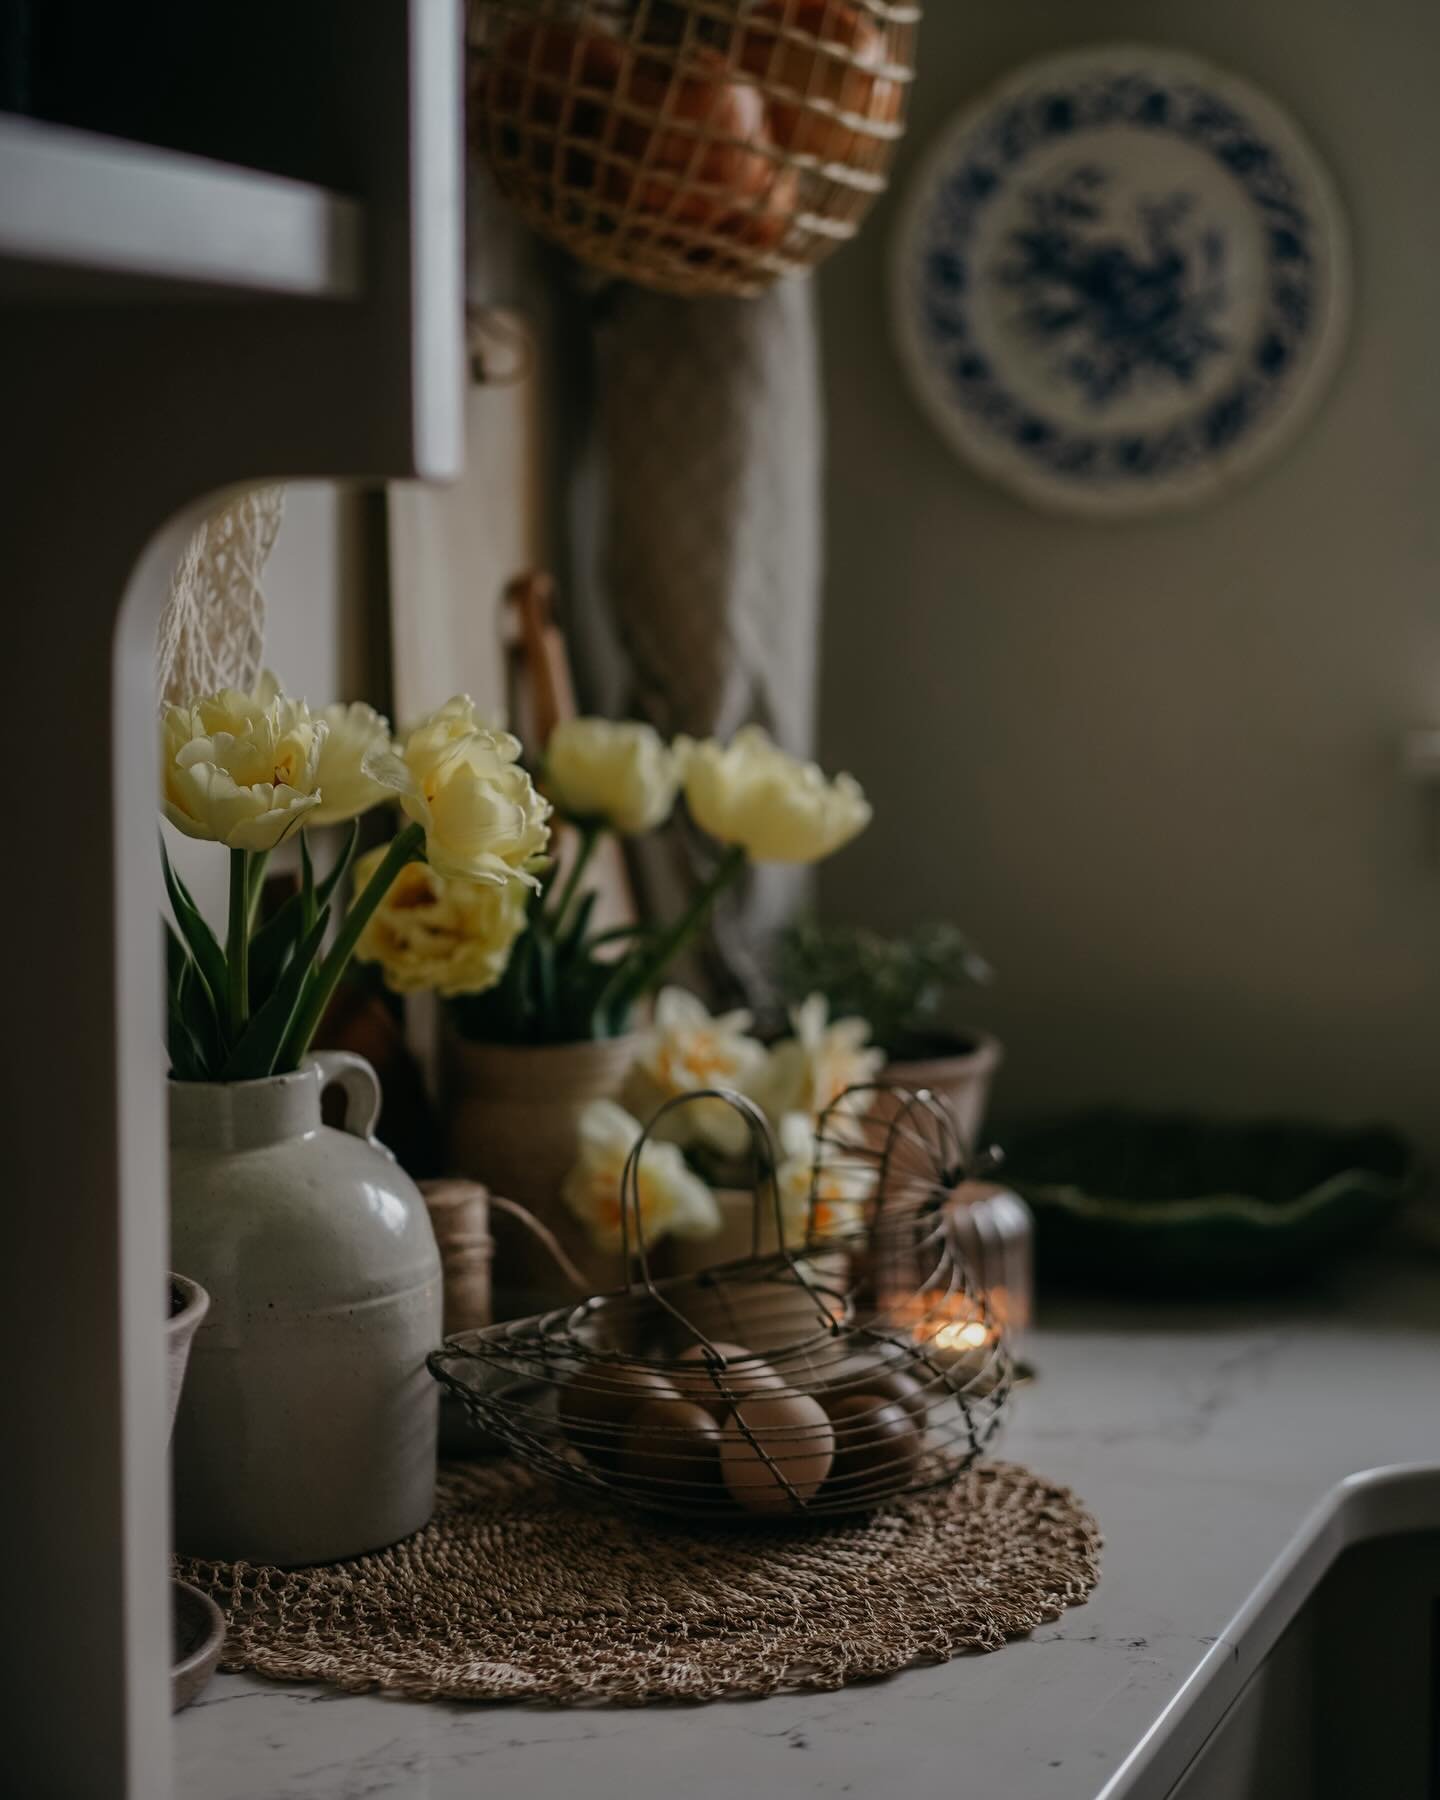 a spring collection | &ldquo;either all days are holy or none are. i have not decided yet.&rdquo; | terry prachett 

#butlerspantry #mycountryhome #countrykitchen #cornersofmyhome #gatherandtend